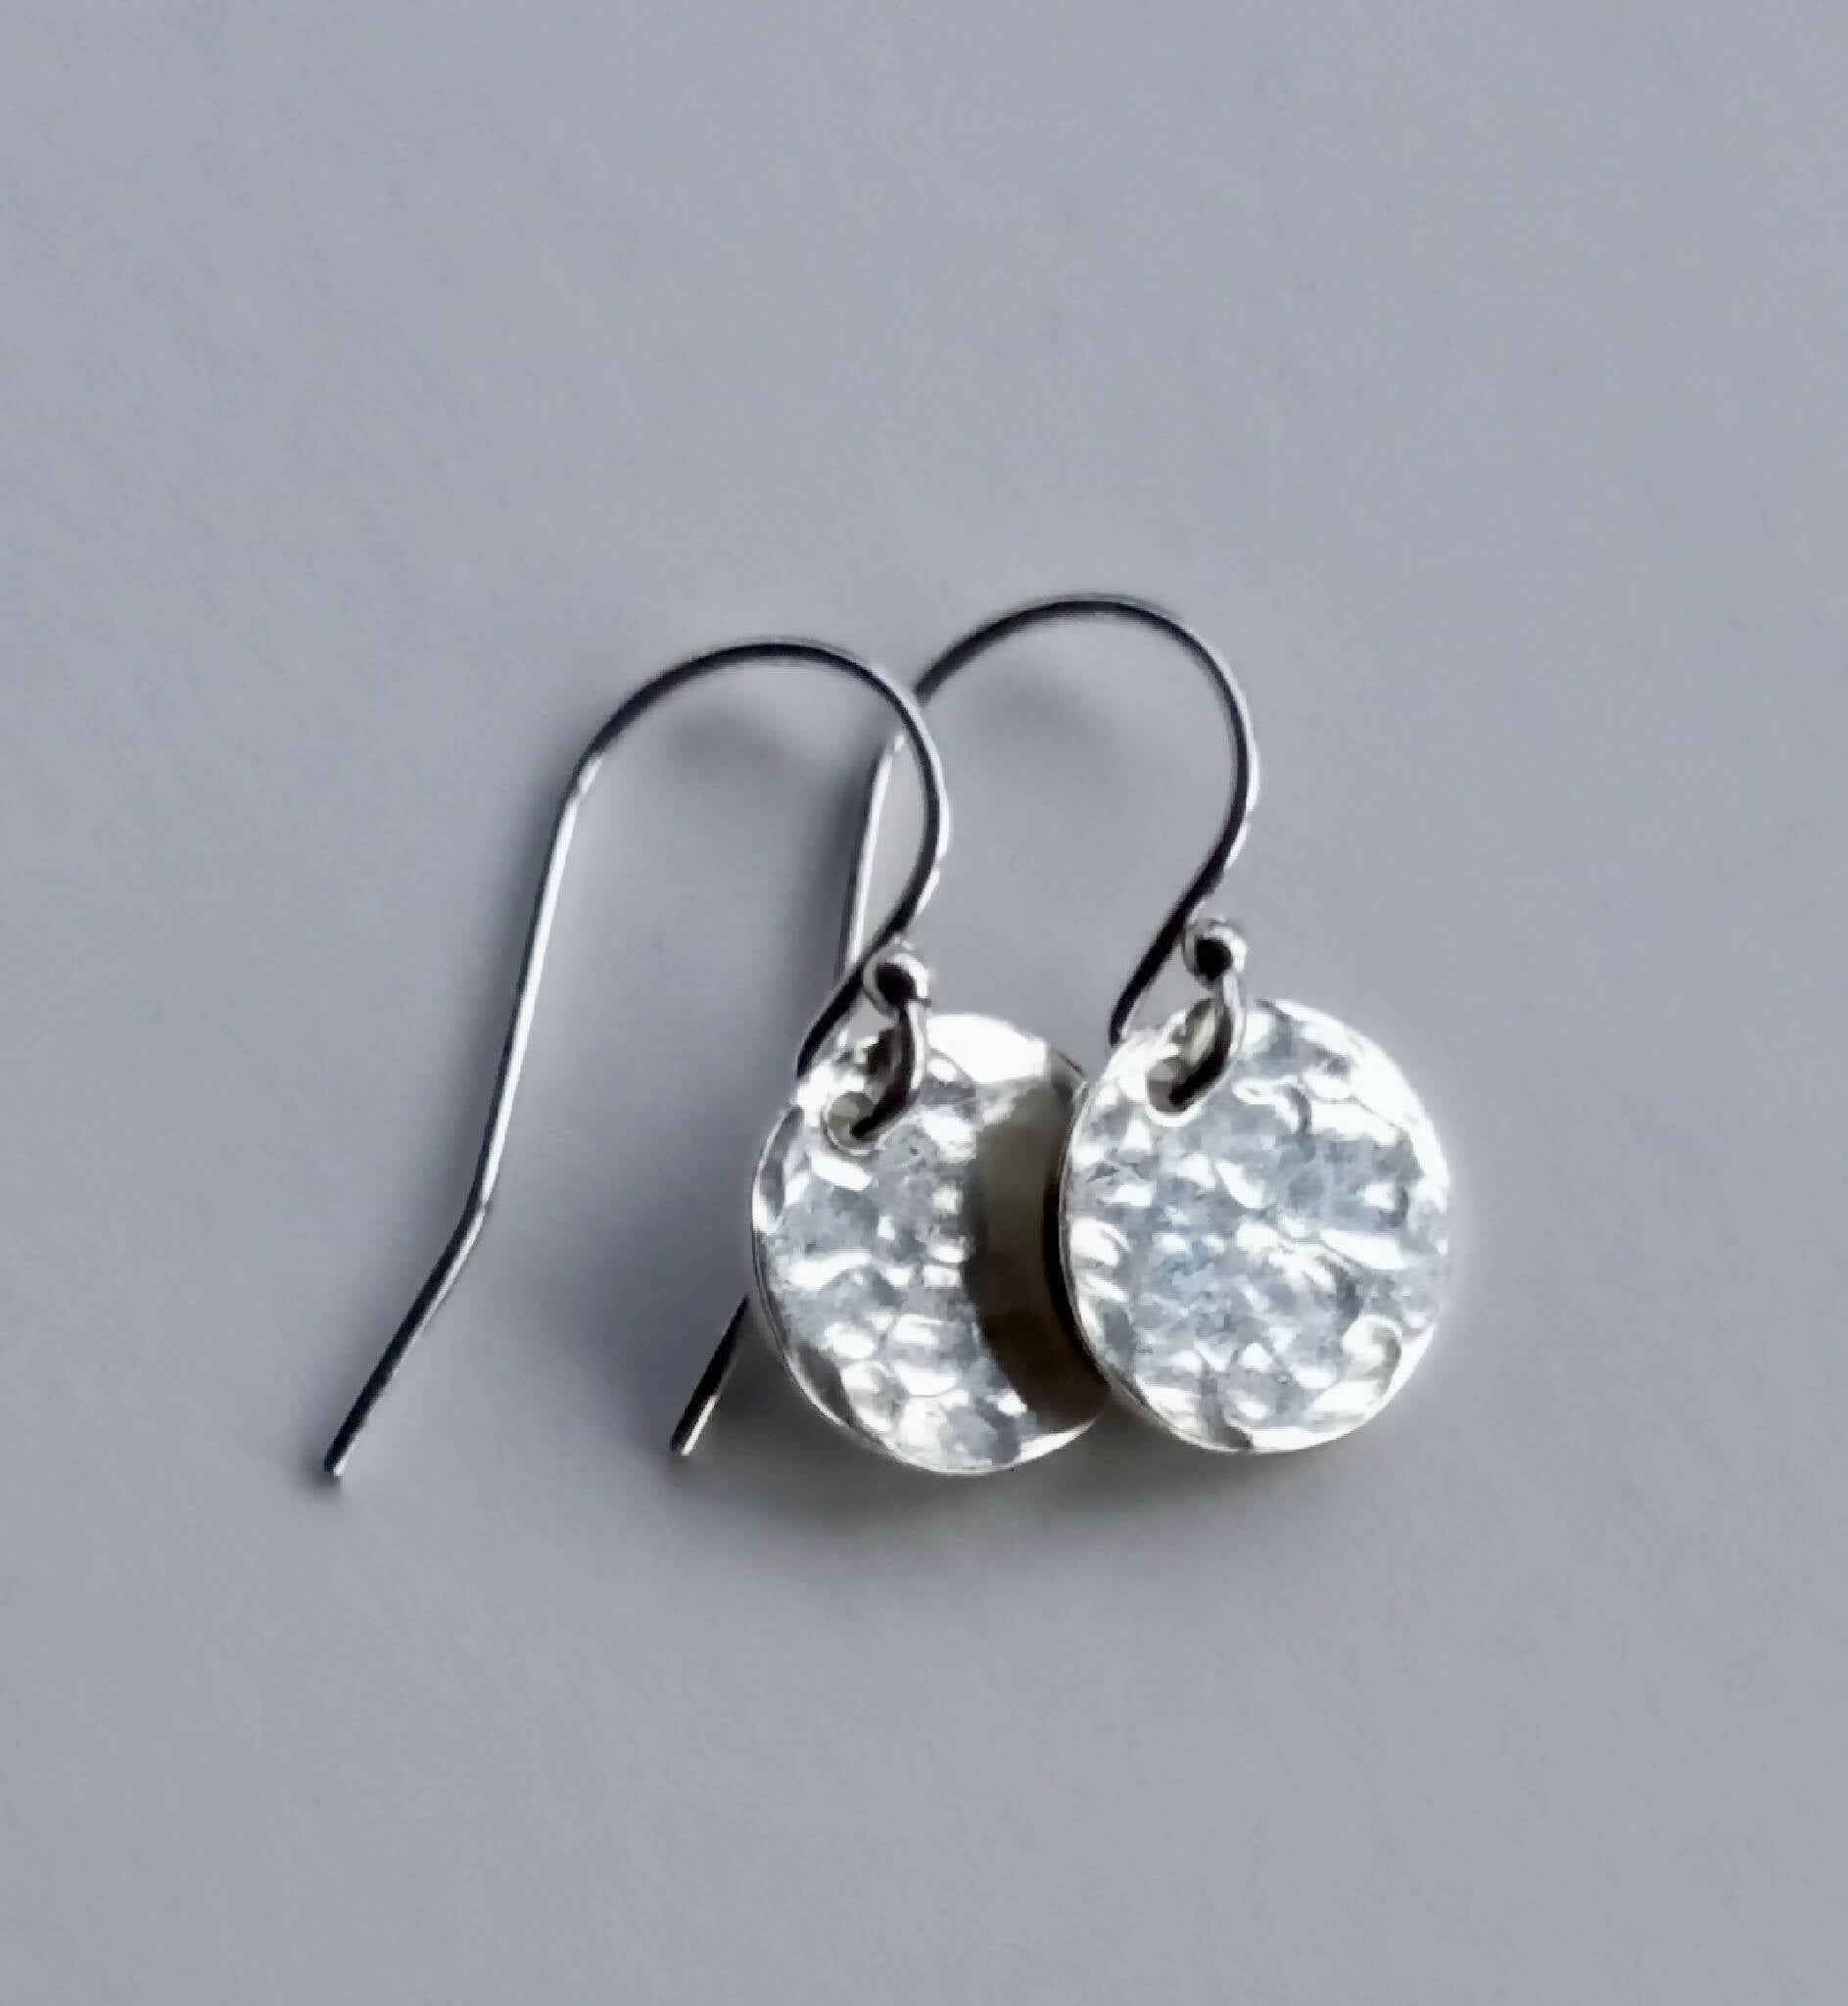 Hammered silver earrings.